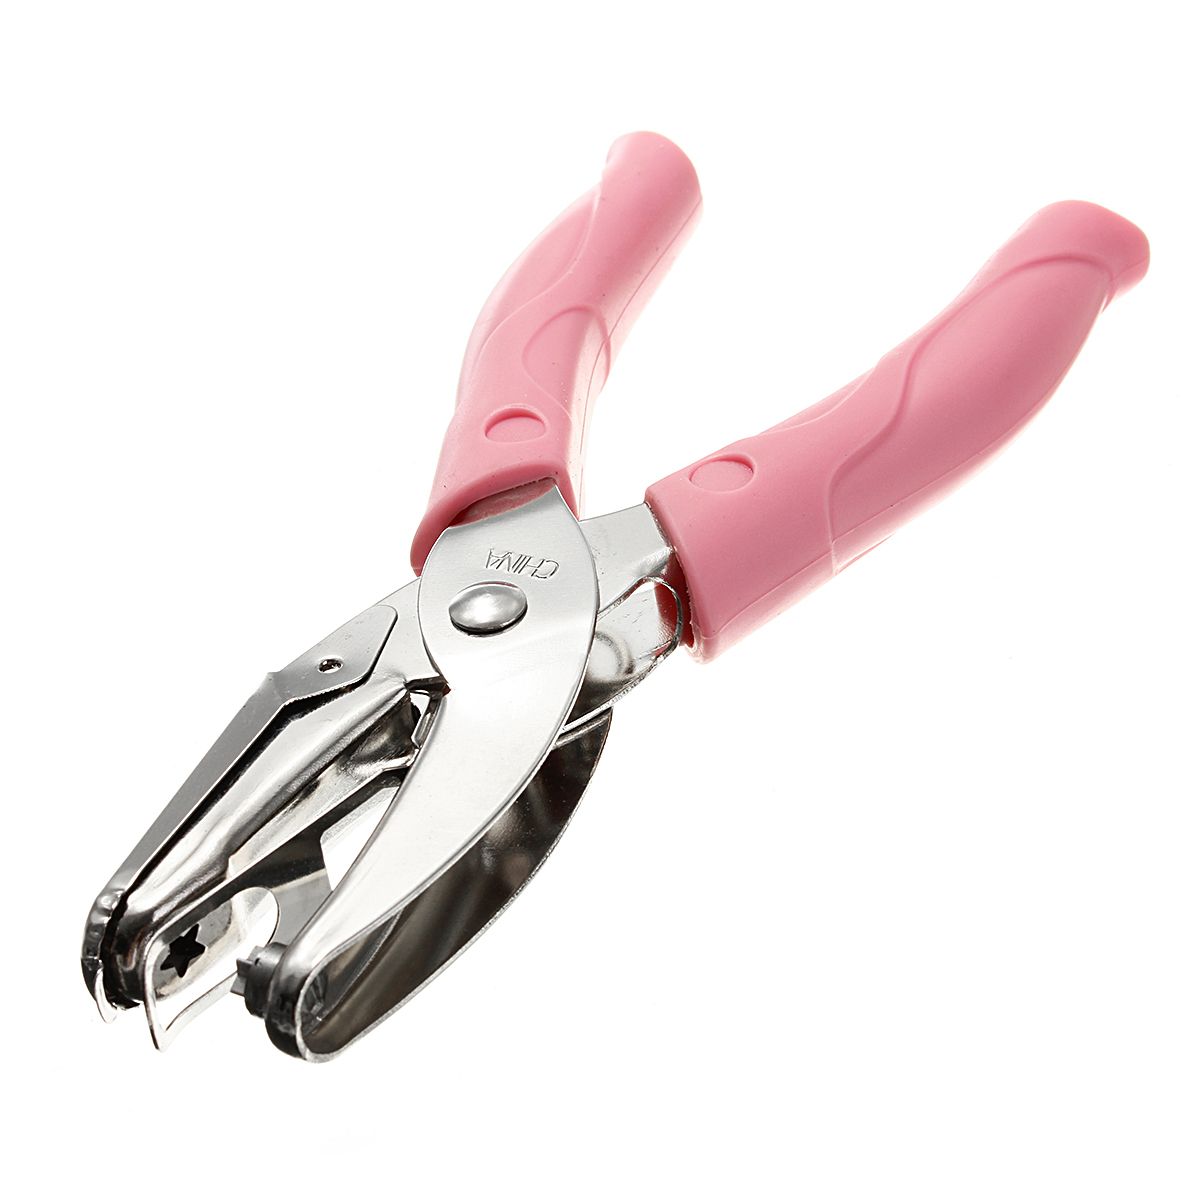 155mm-Stainless-Steel-Manual-Hole-Puncher-Pliers-DIY-Hand-Tool---5-Size-1089892